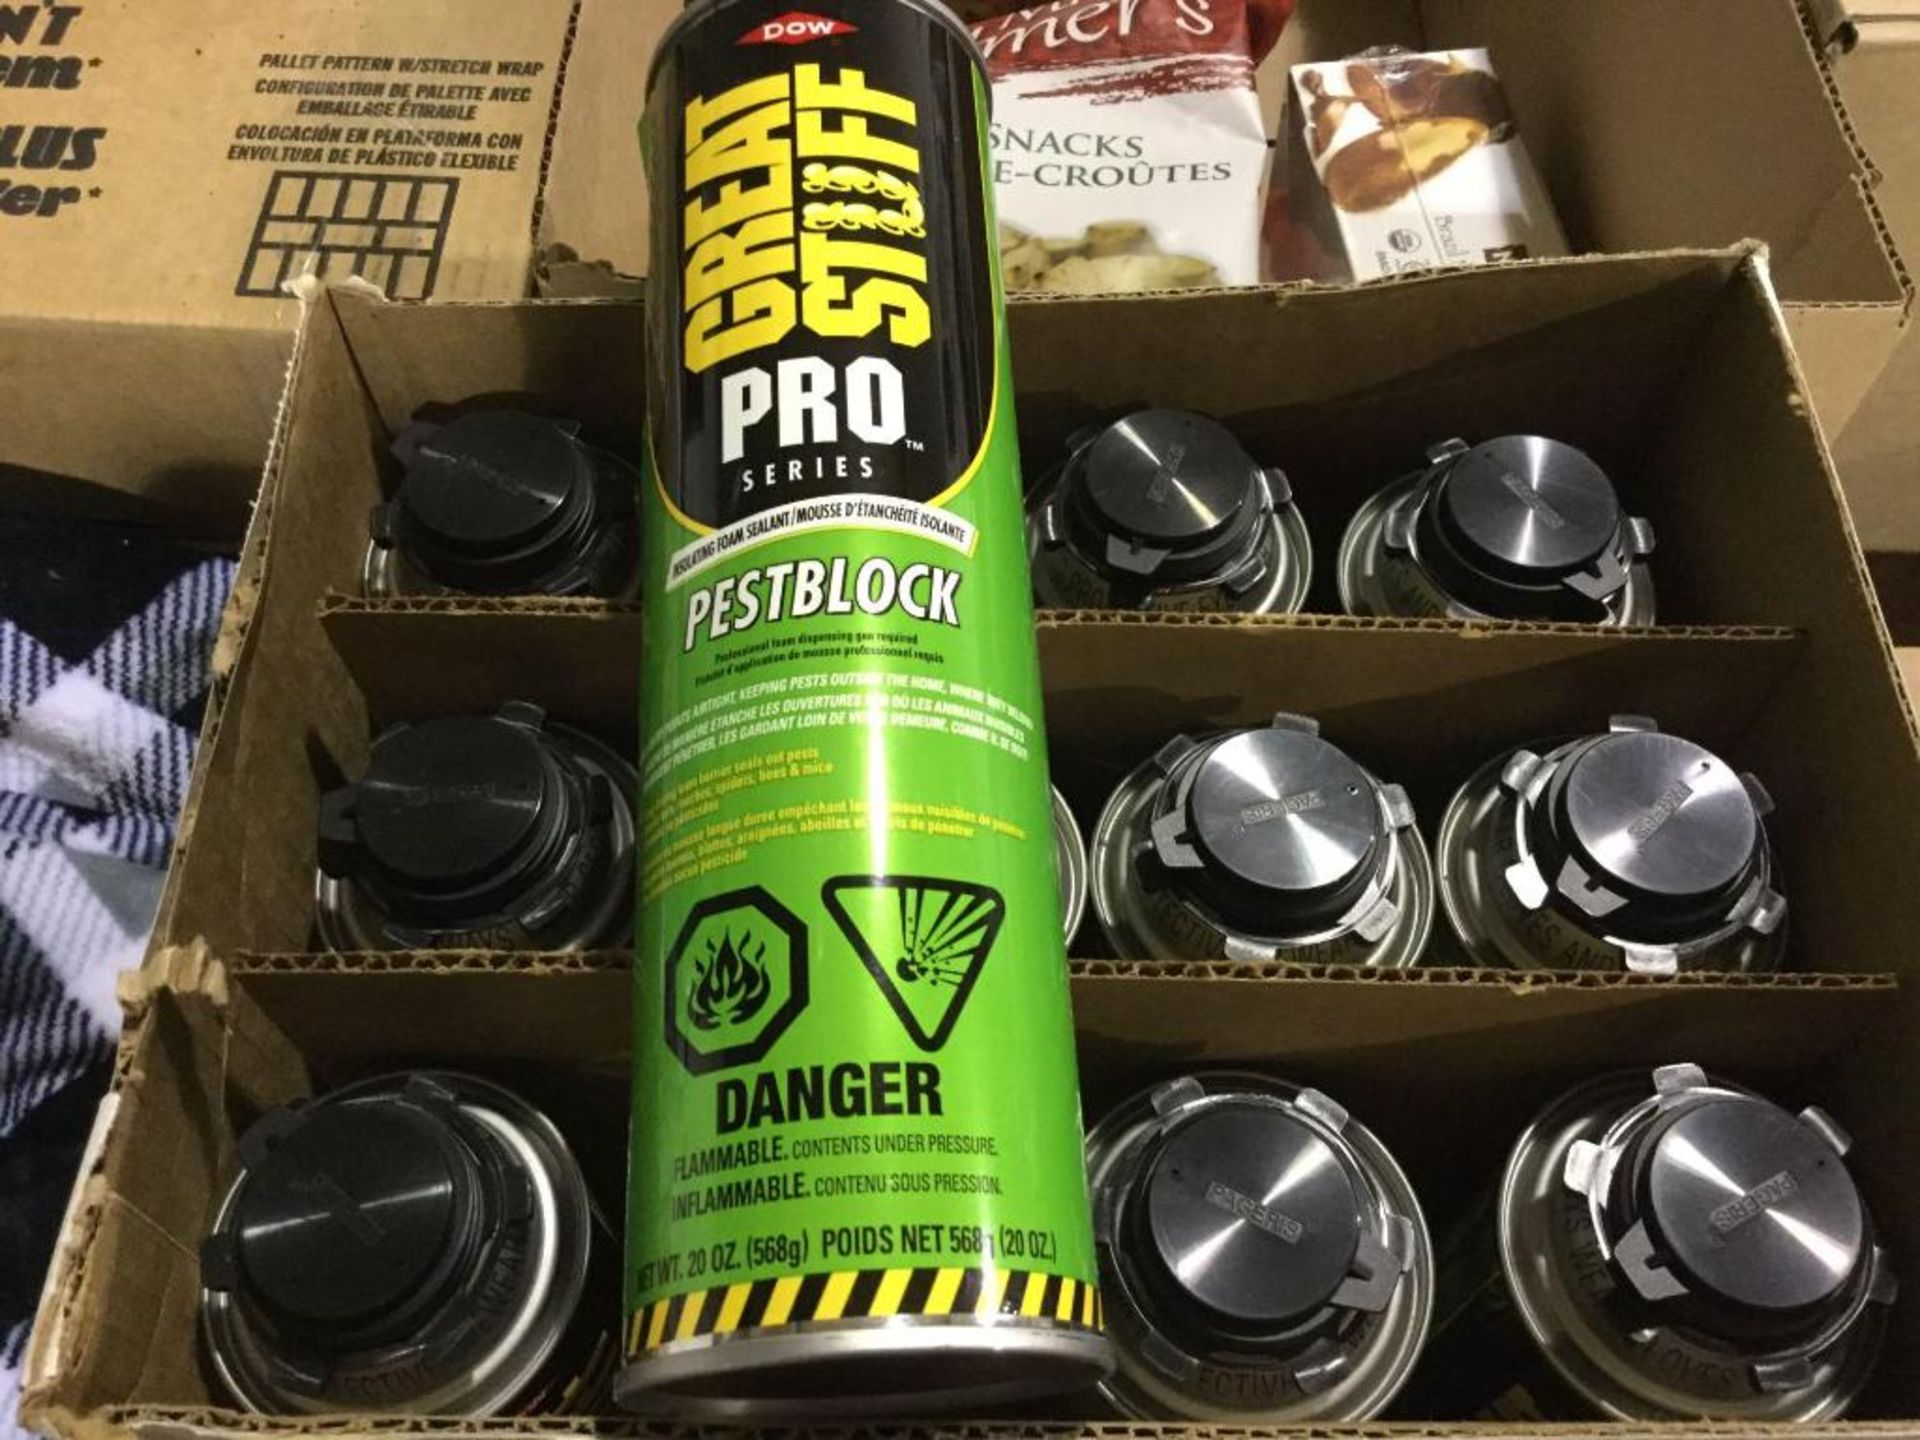 Case of 12 x 568g cans of Great Stuff Pro - Pest block